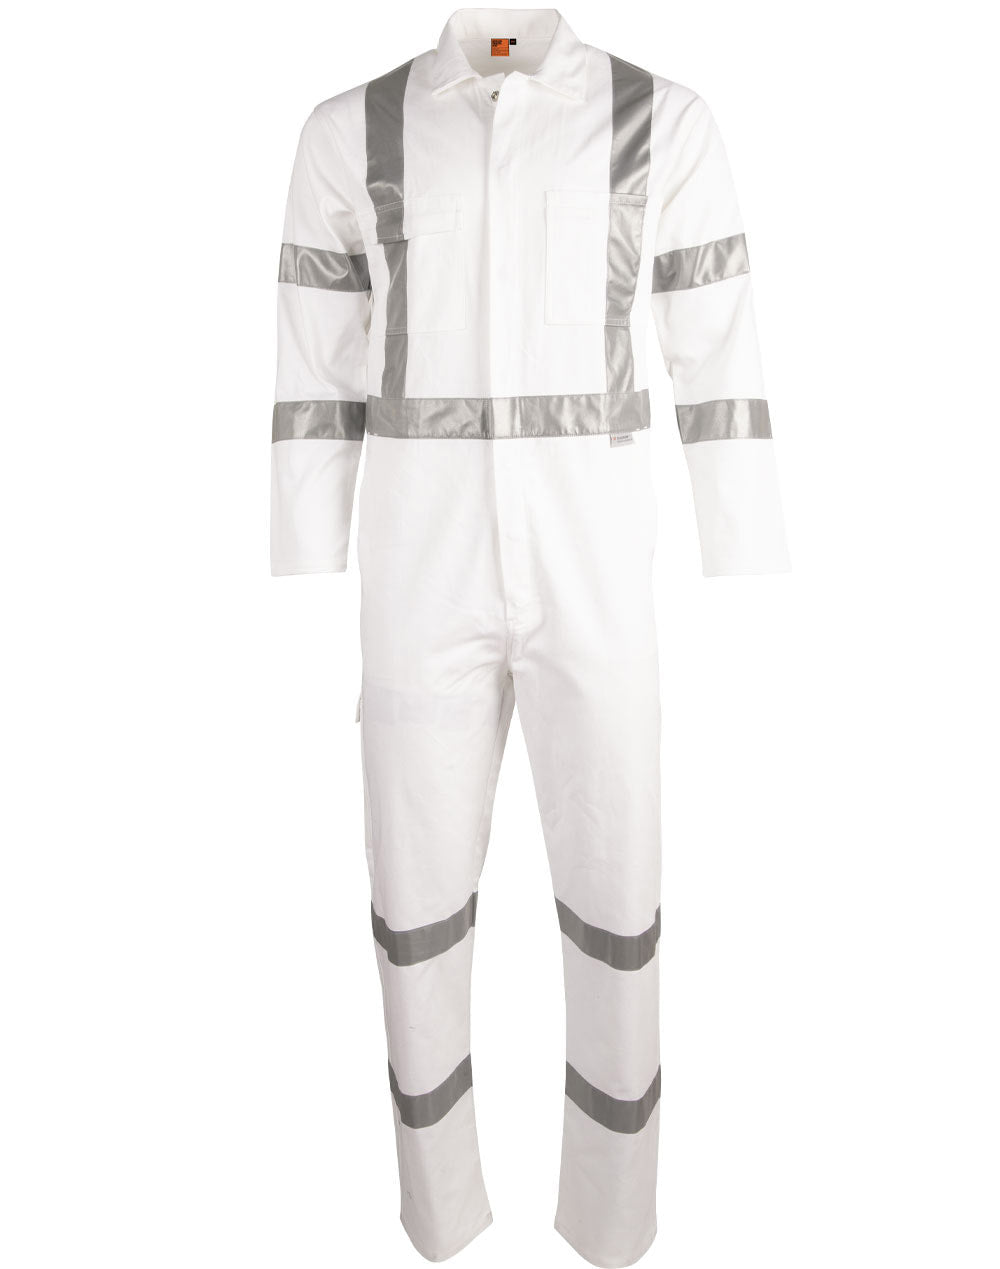 AIW WA09HV Mens biomotion nightwear coverall with x back tape configuration